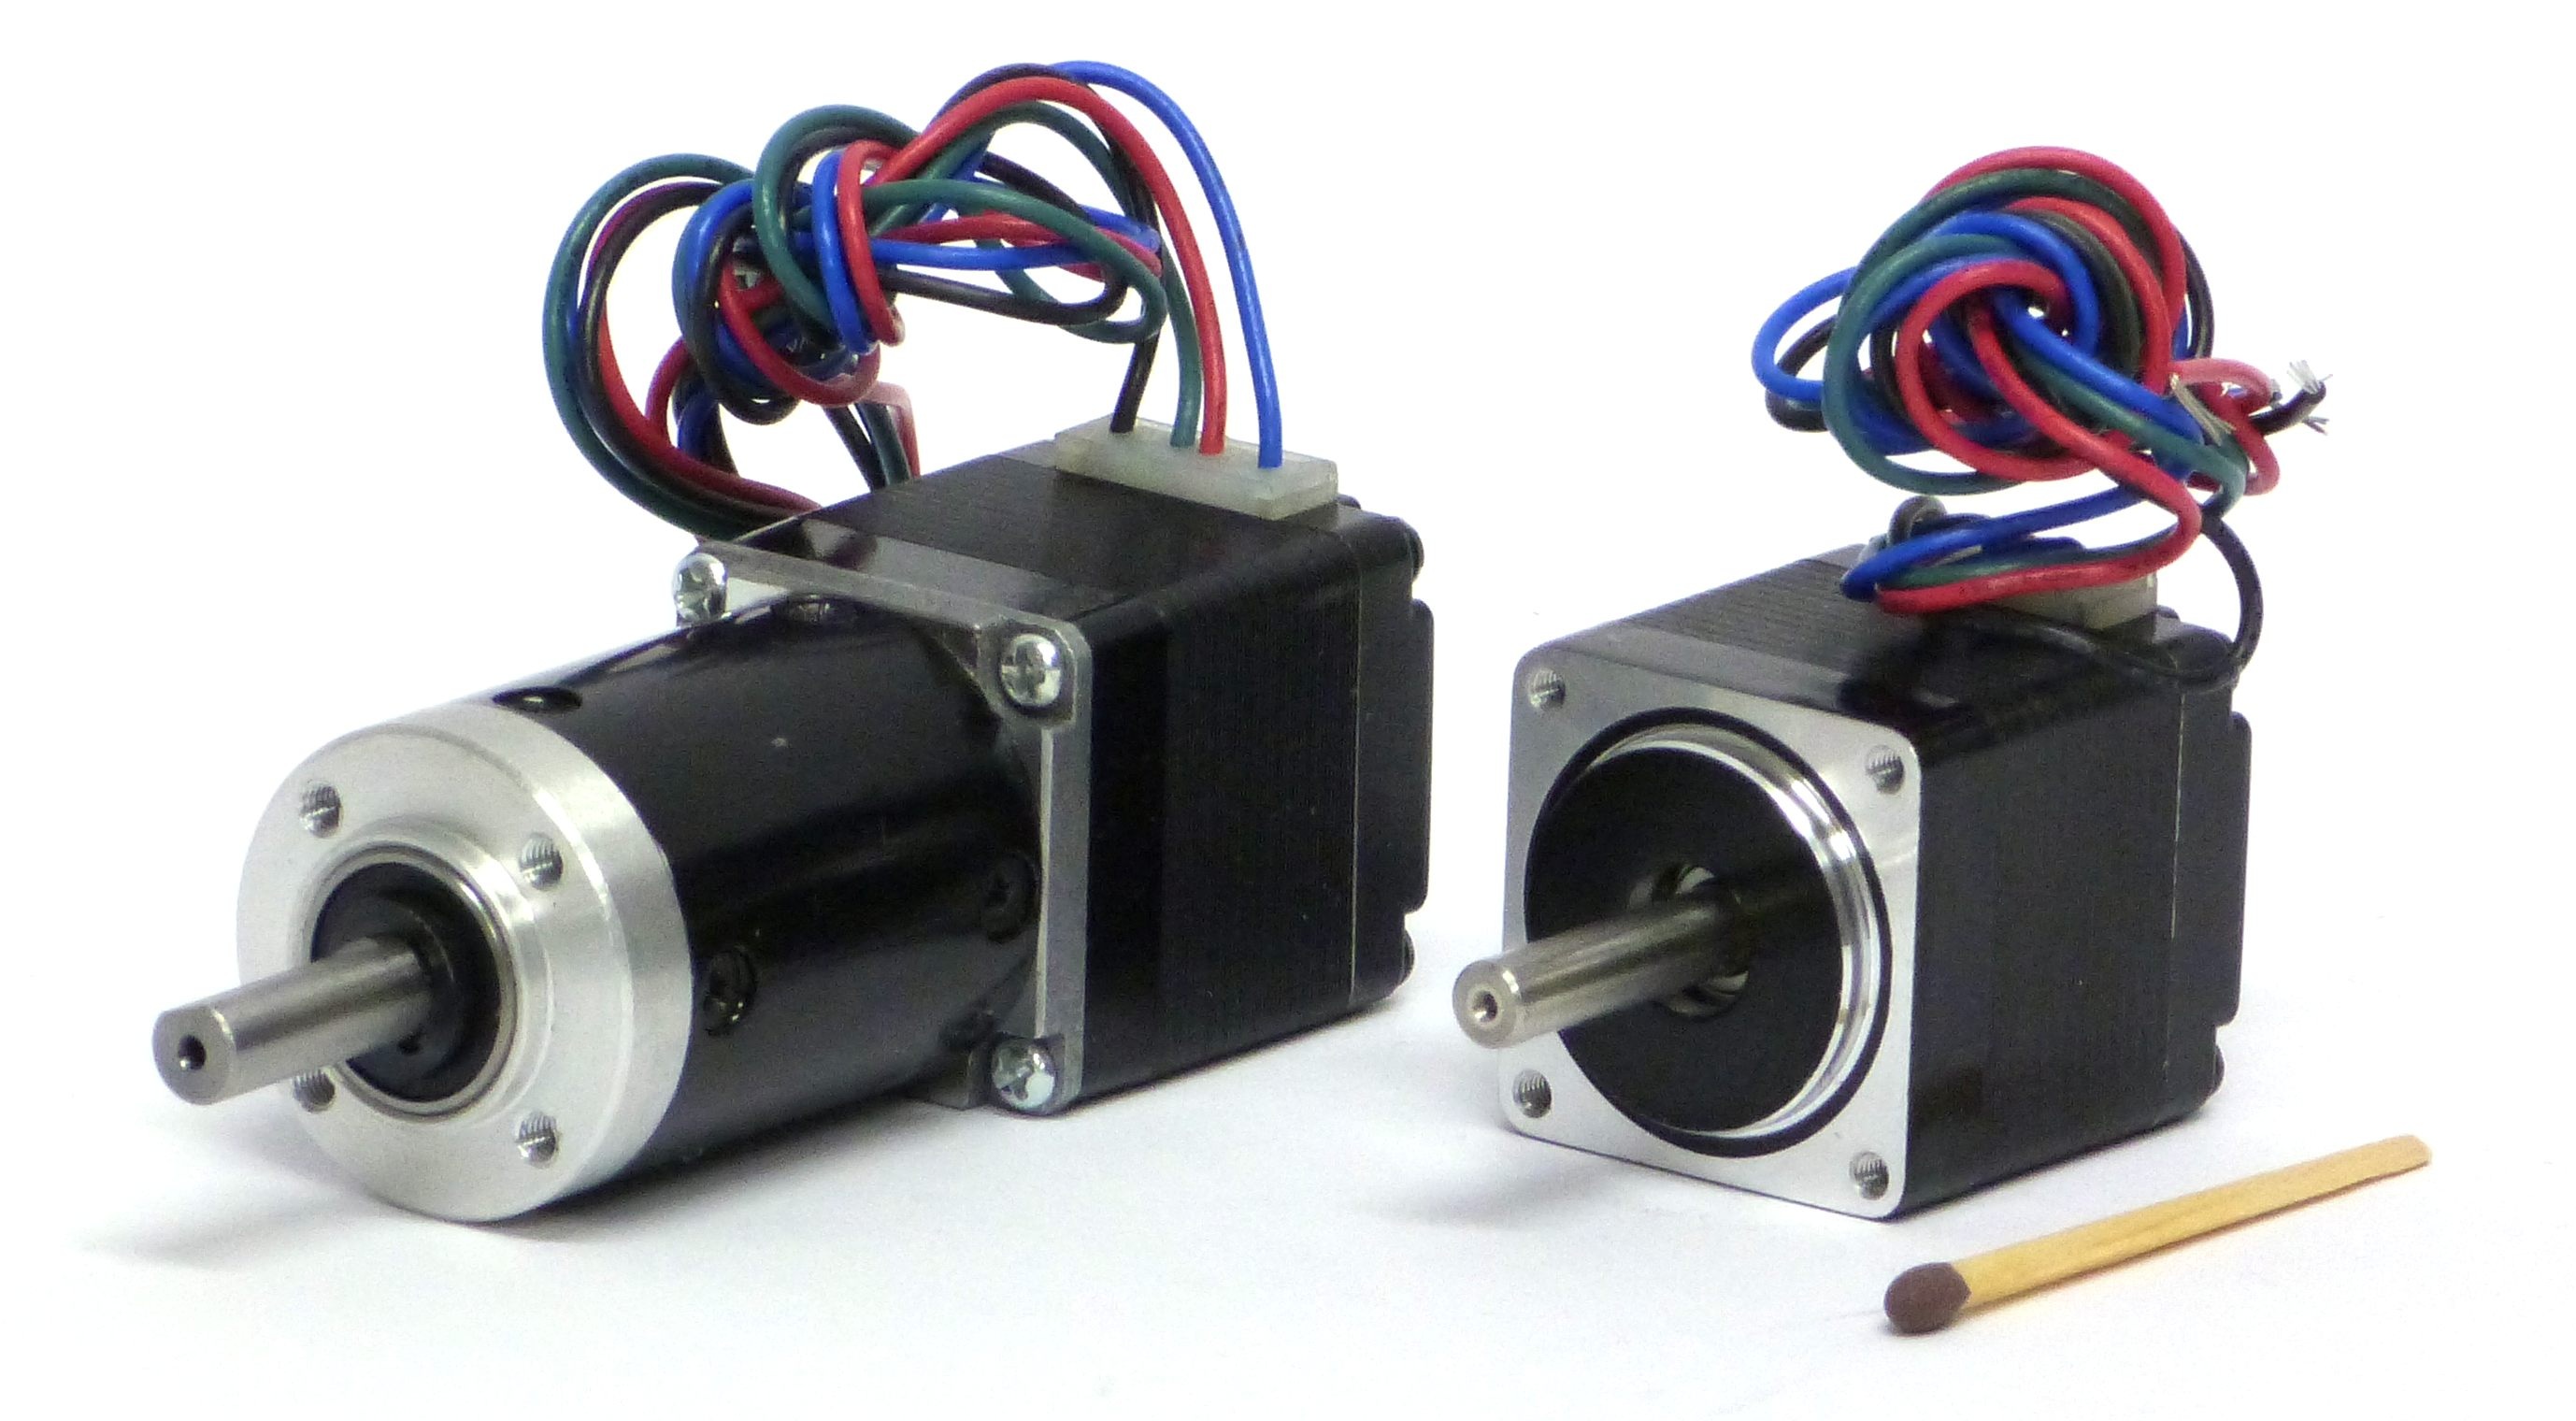 Stepper Motor Sizes And Torque | Motor Informations